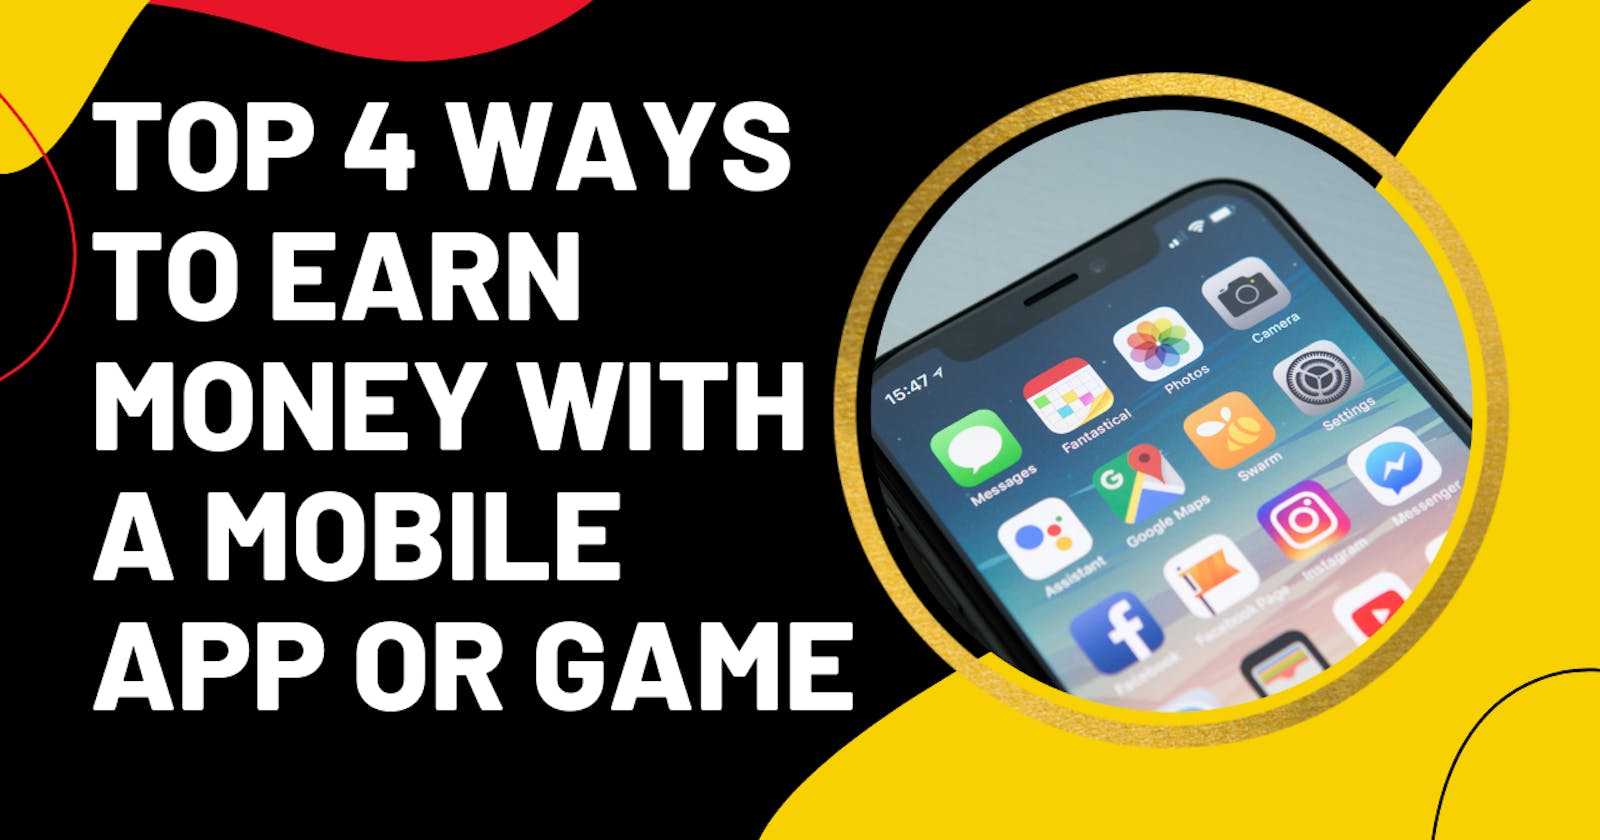 Top 4 ways to earn money with a mobile app or game